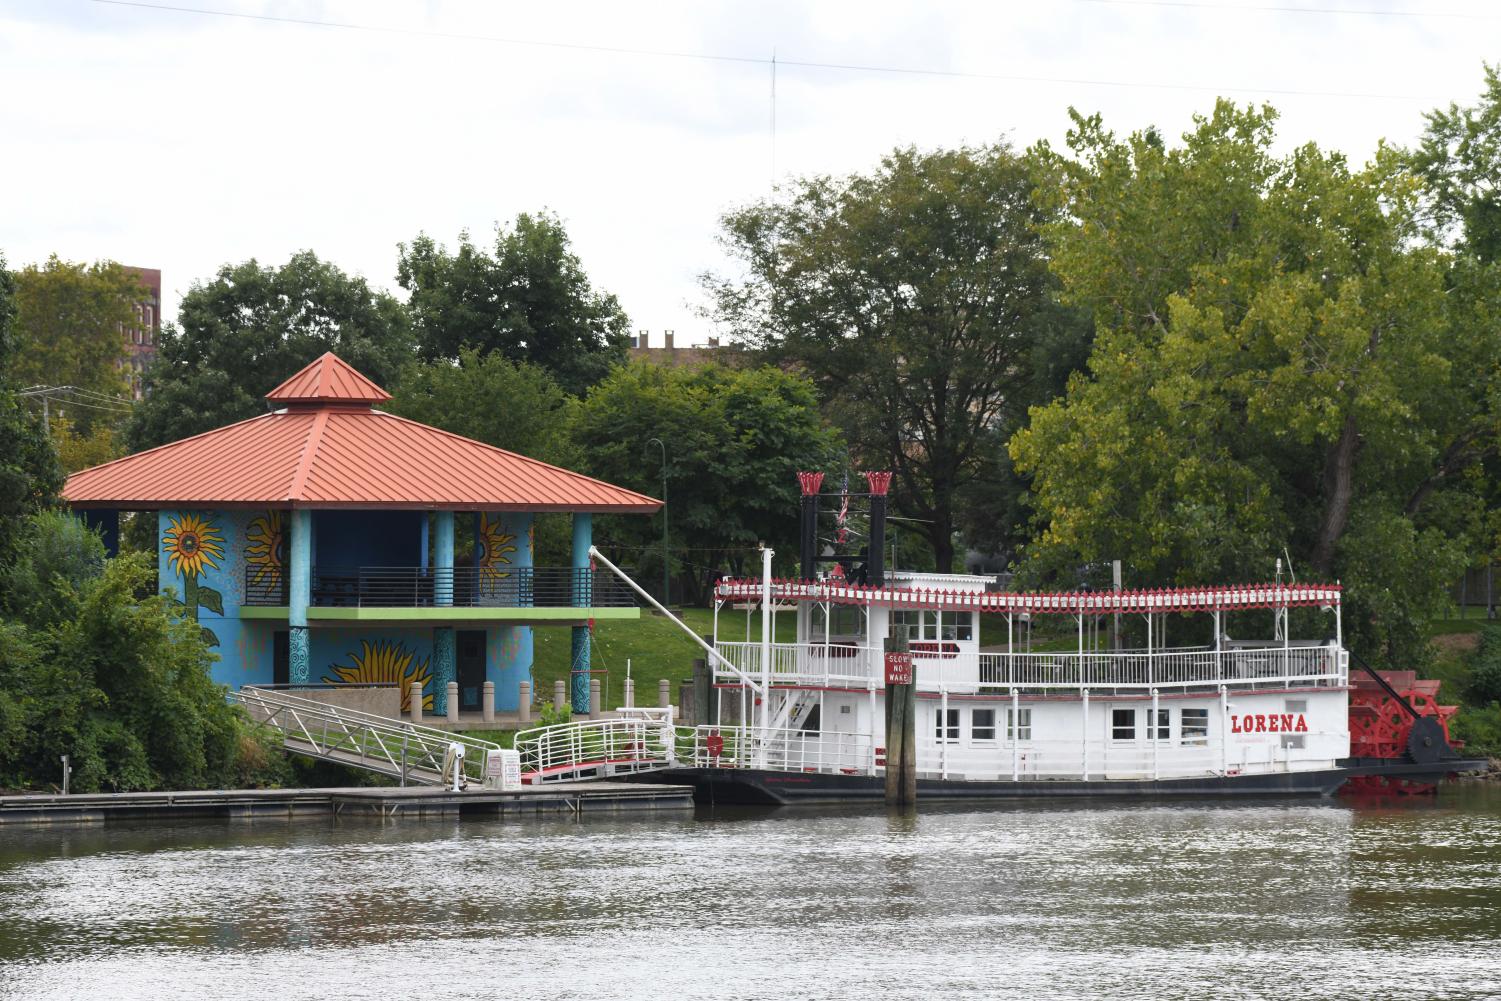 Commissioners vote to sell Lorena Sternwheeler, won’t be replaced Y